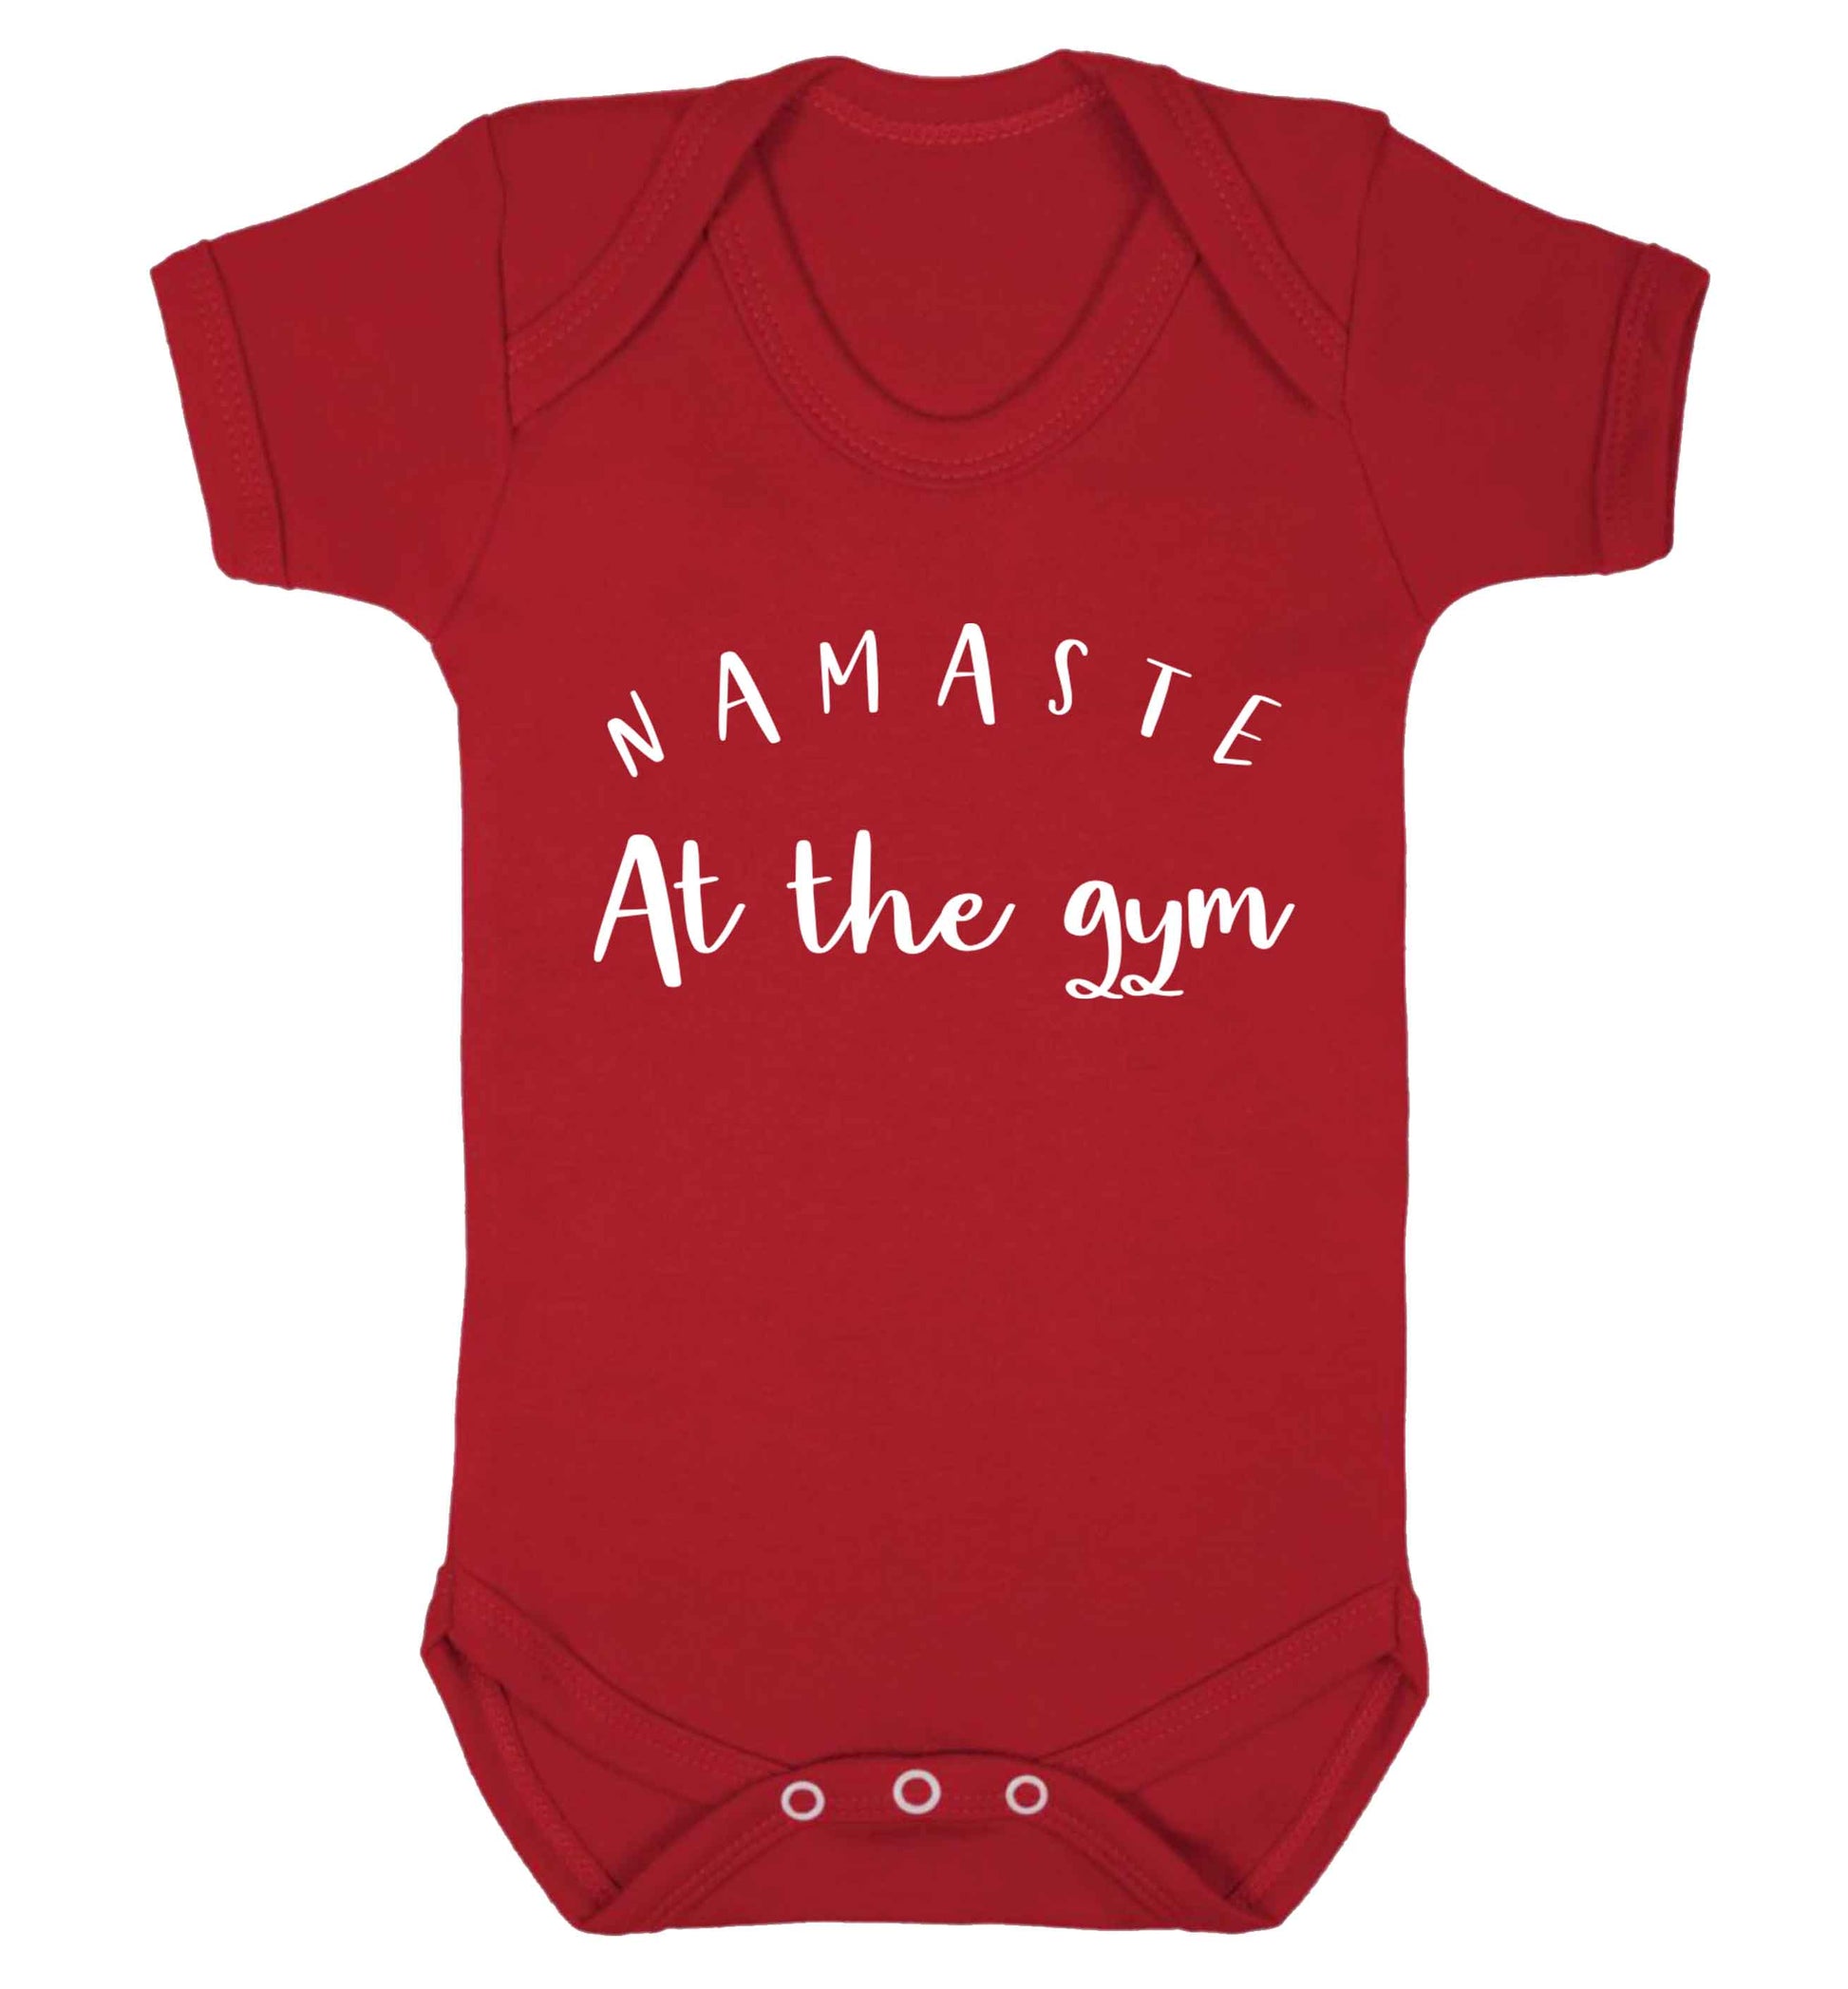 Namaste at the gym Baby Vest red 18-24 months